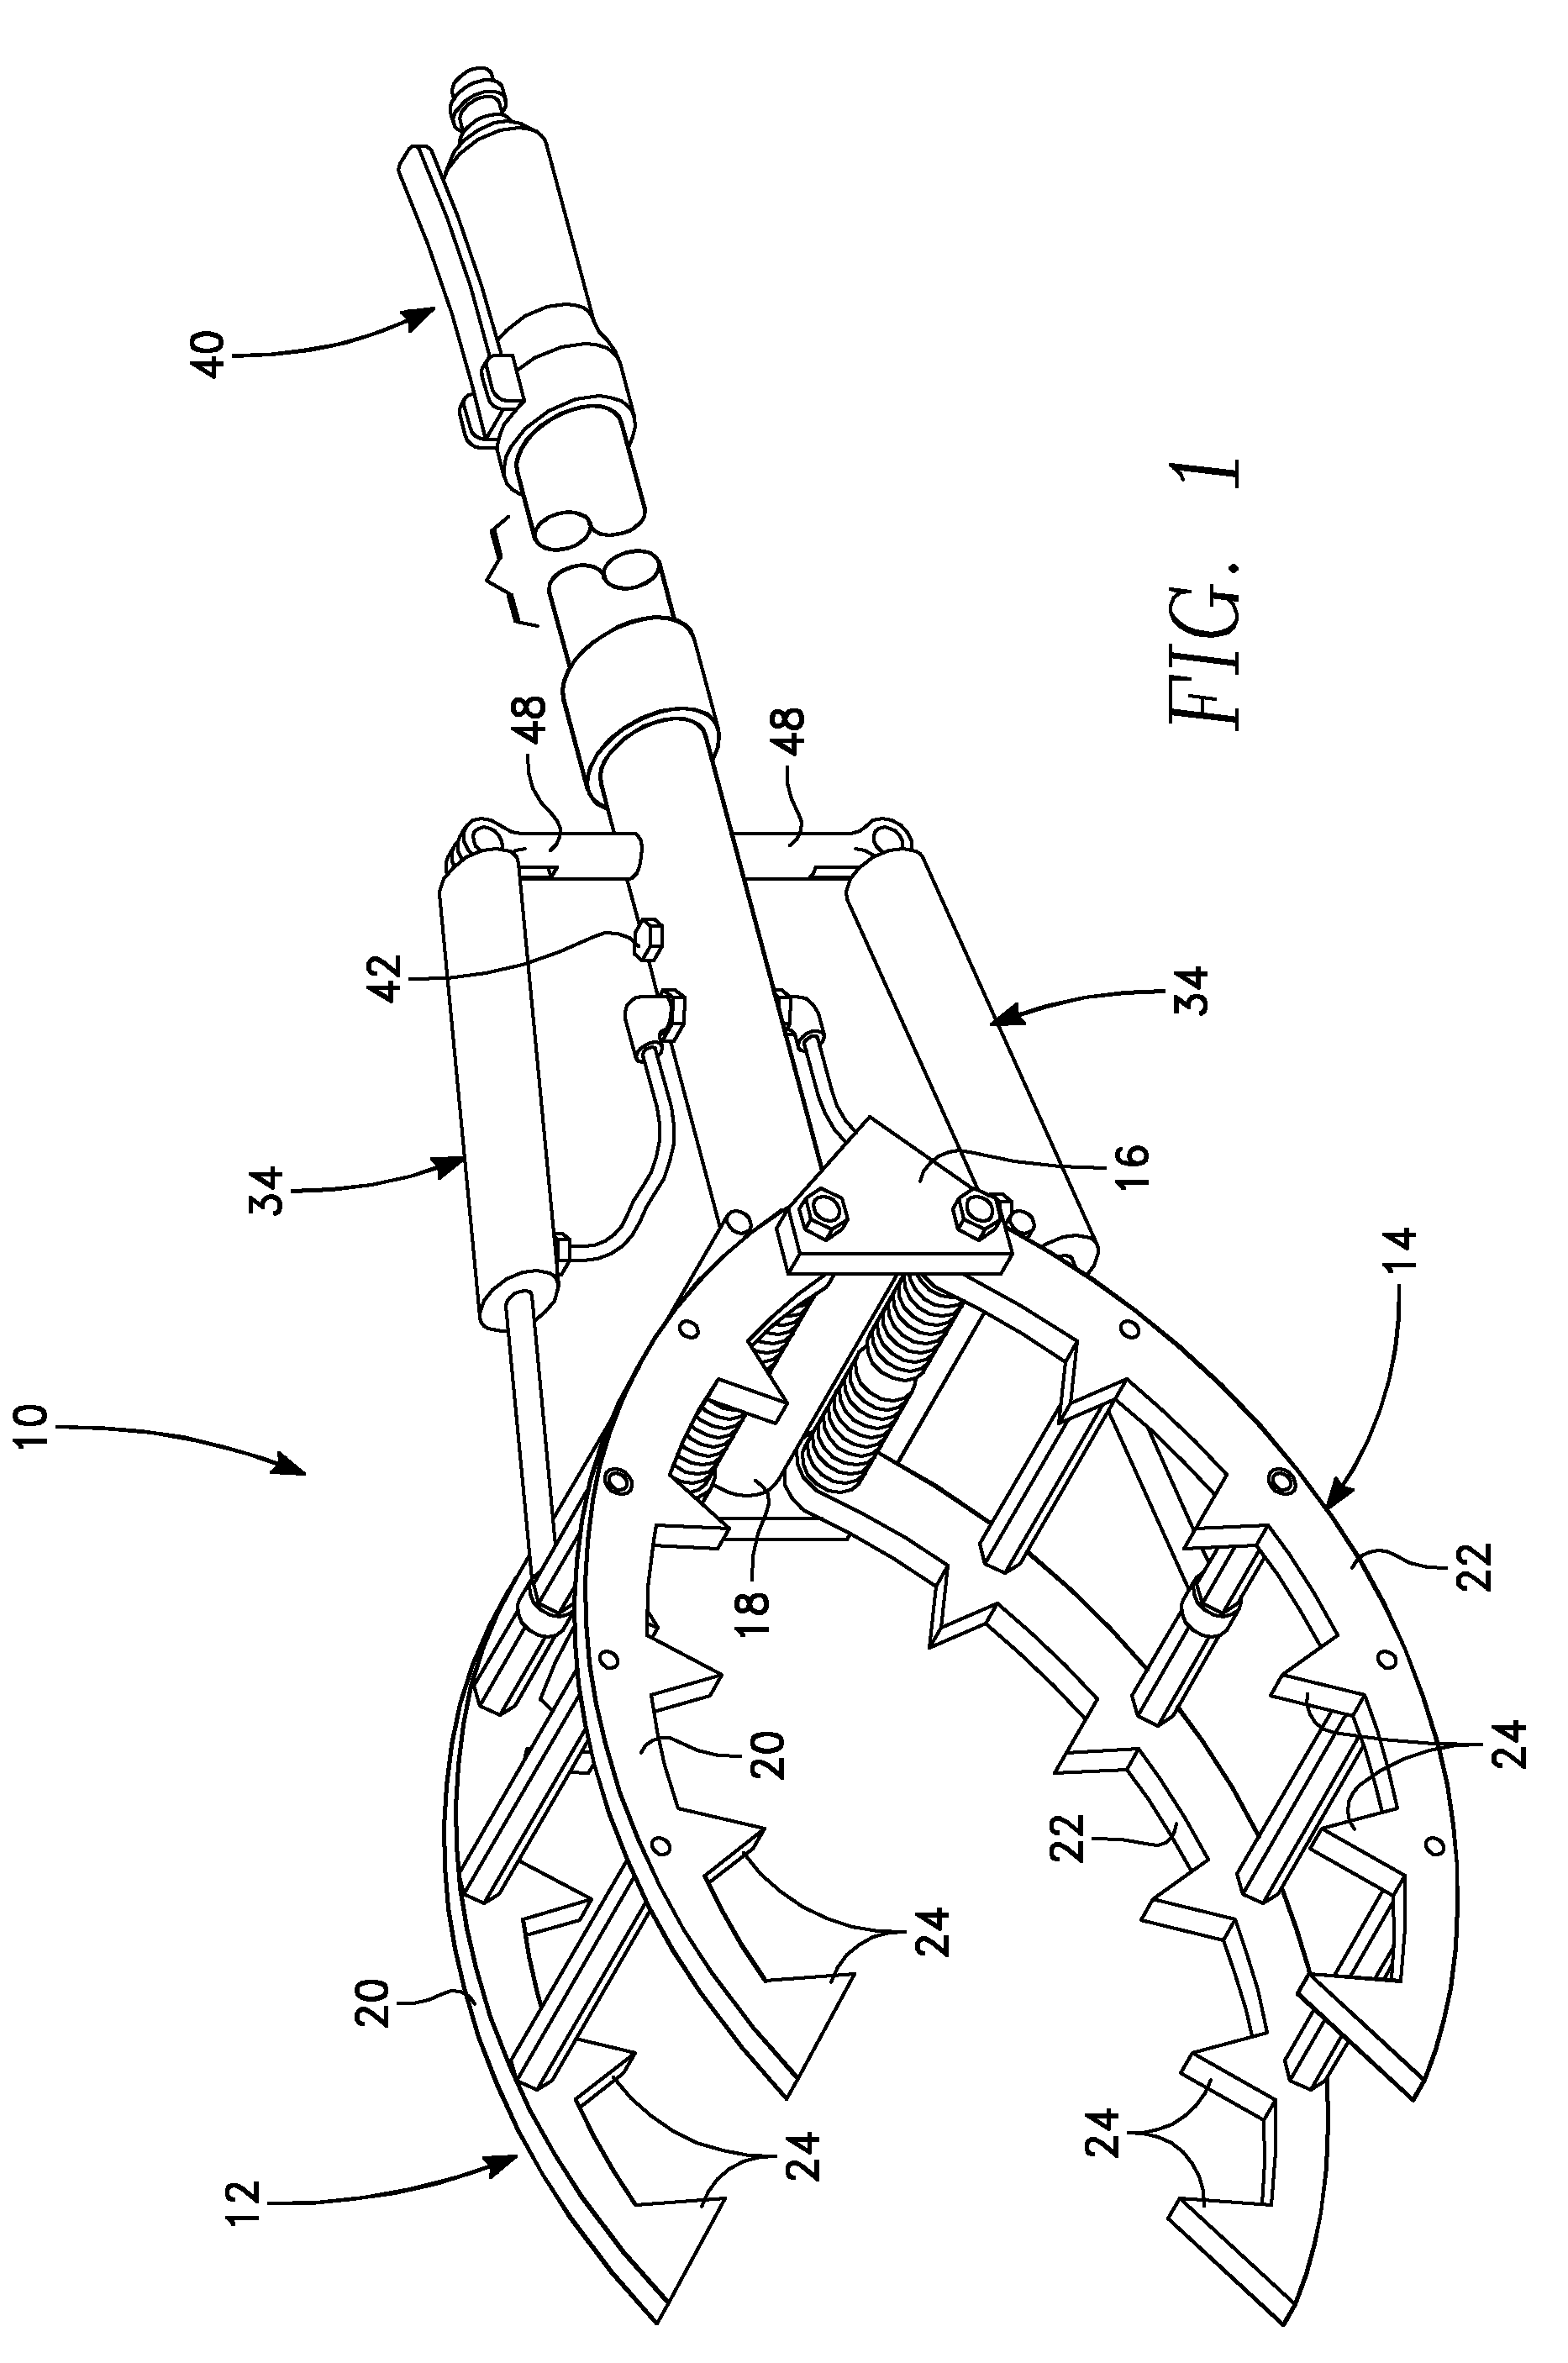 Rock grasping and removal apparatus